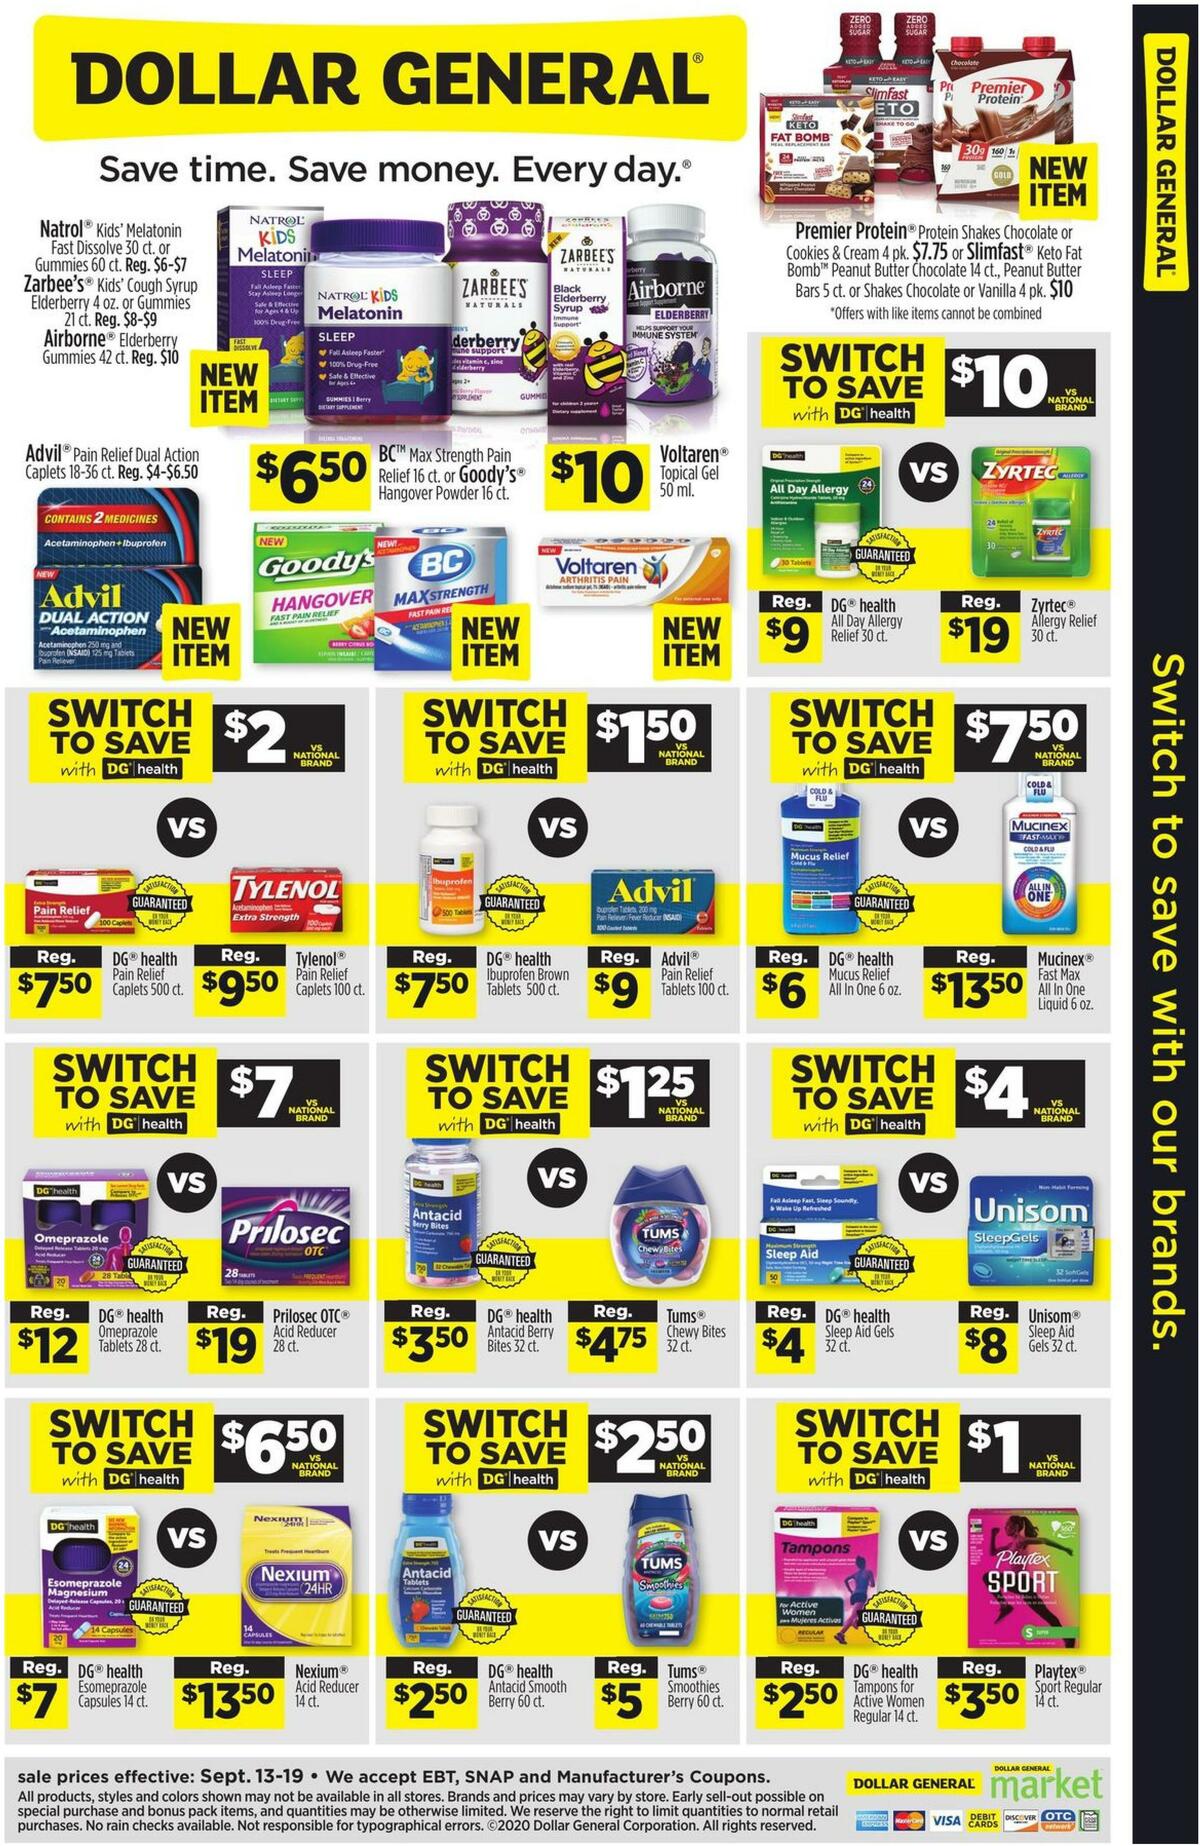 Dollar General Switch to save with our brands Weekly Ad from September 13